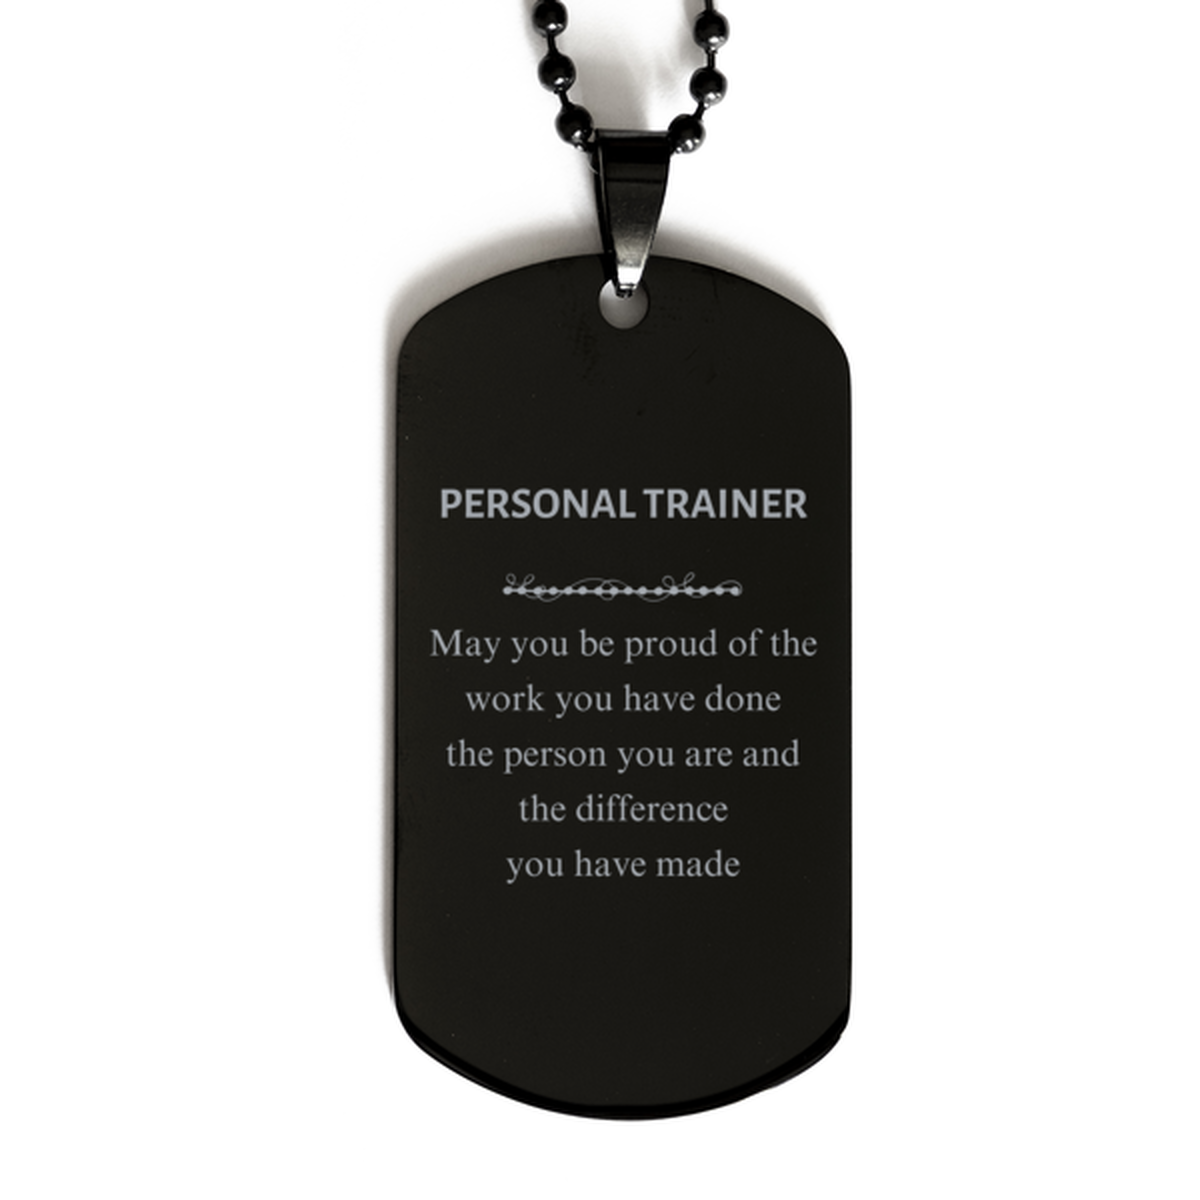 Personal Trainer May you be proud of the work you have done, Retirement Personal Trainer Black Dog Tag for Colleague Appreciation Gifts Amazing for Personal Trainer